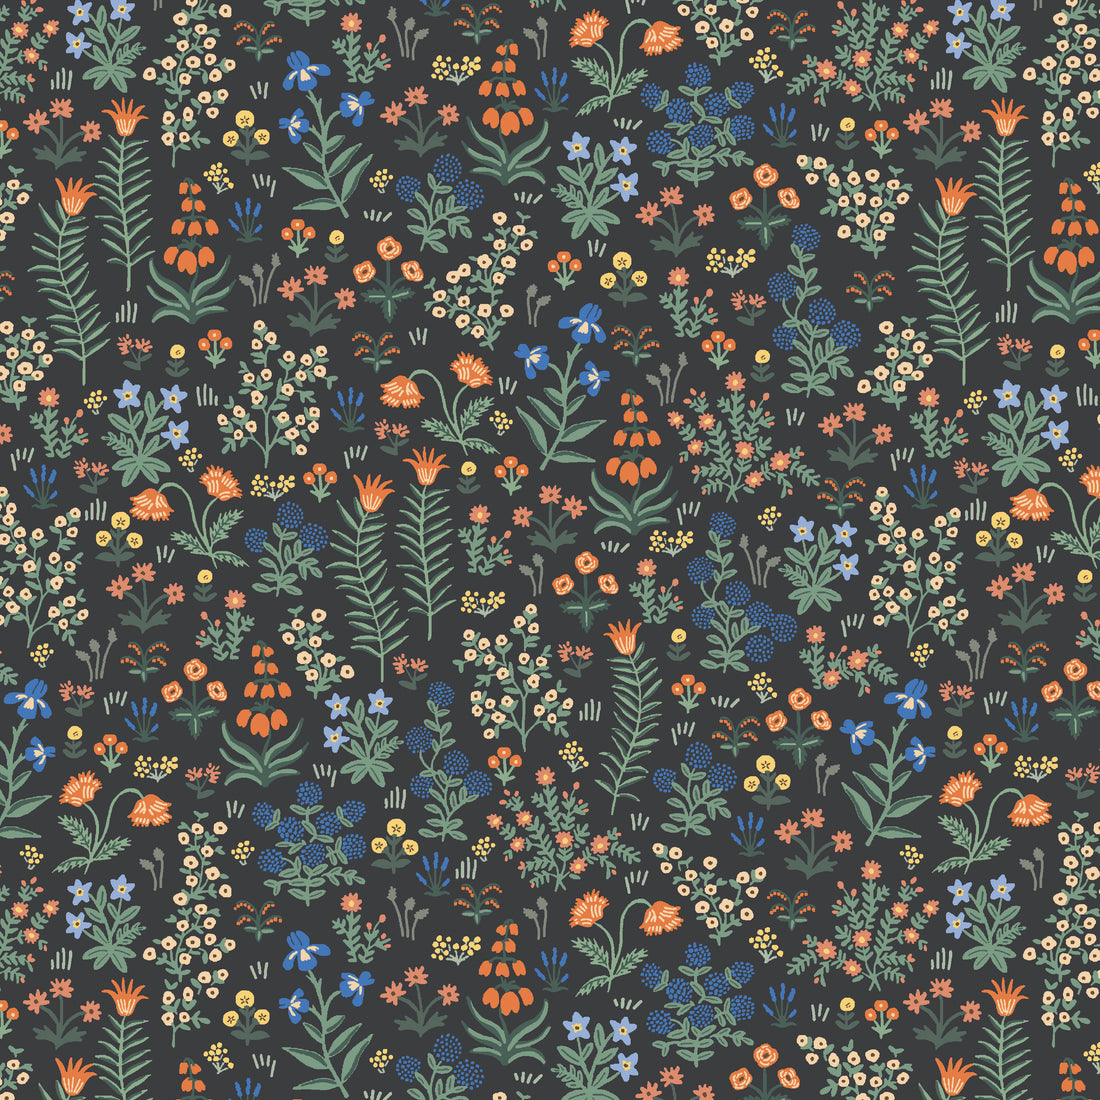 Menagerie Garden Black - Camont by Rifle Paper Co